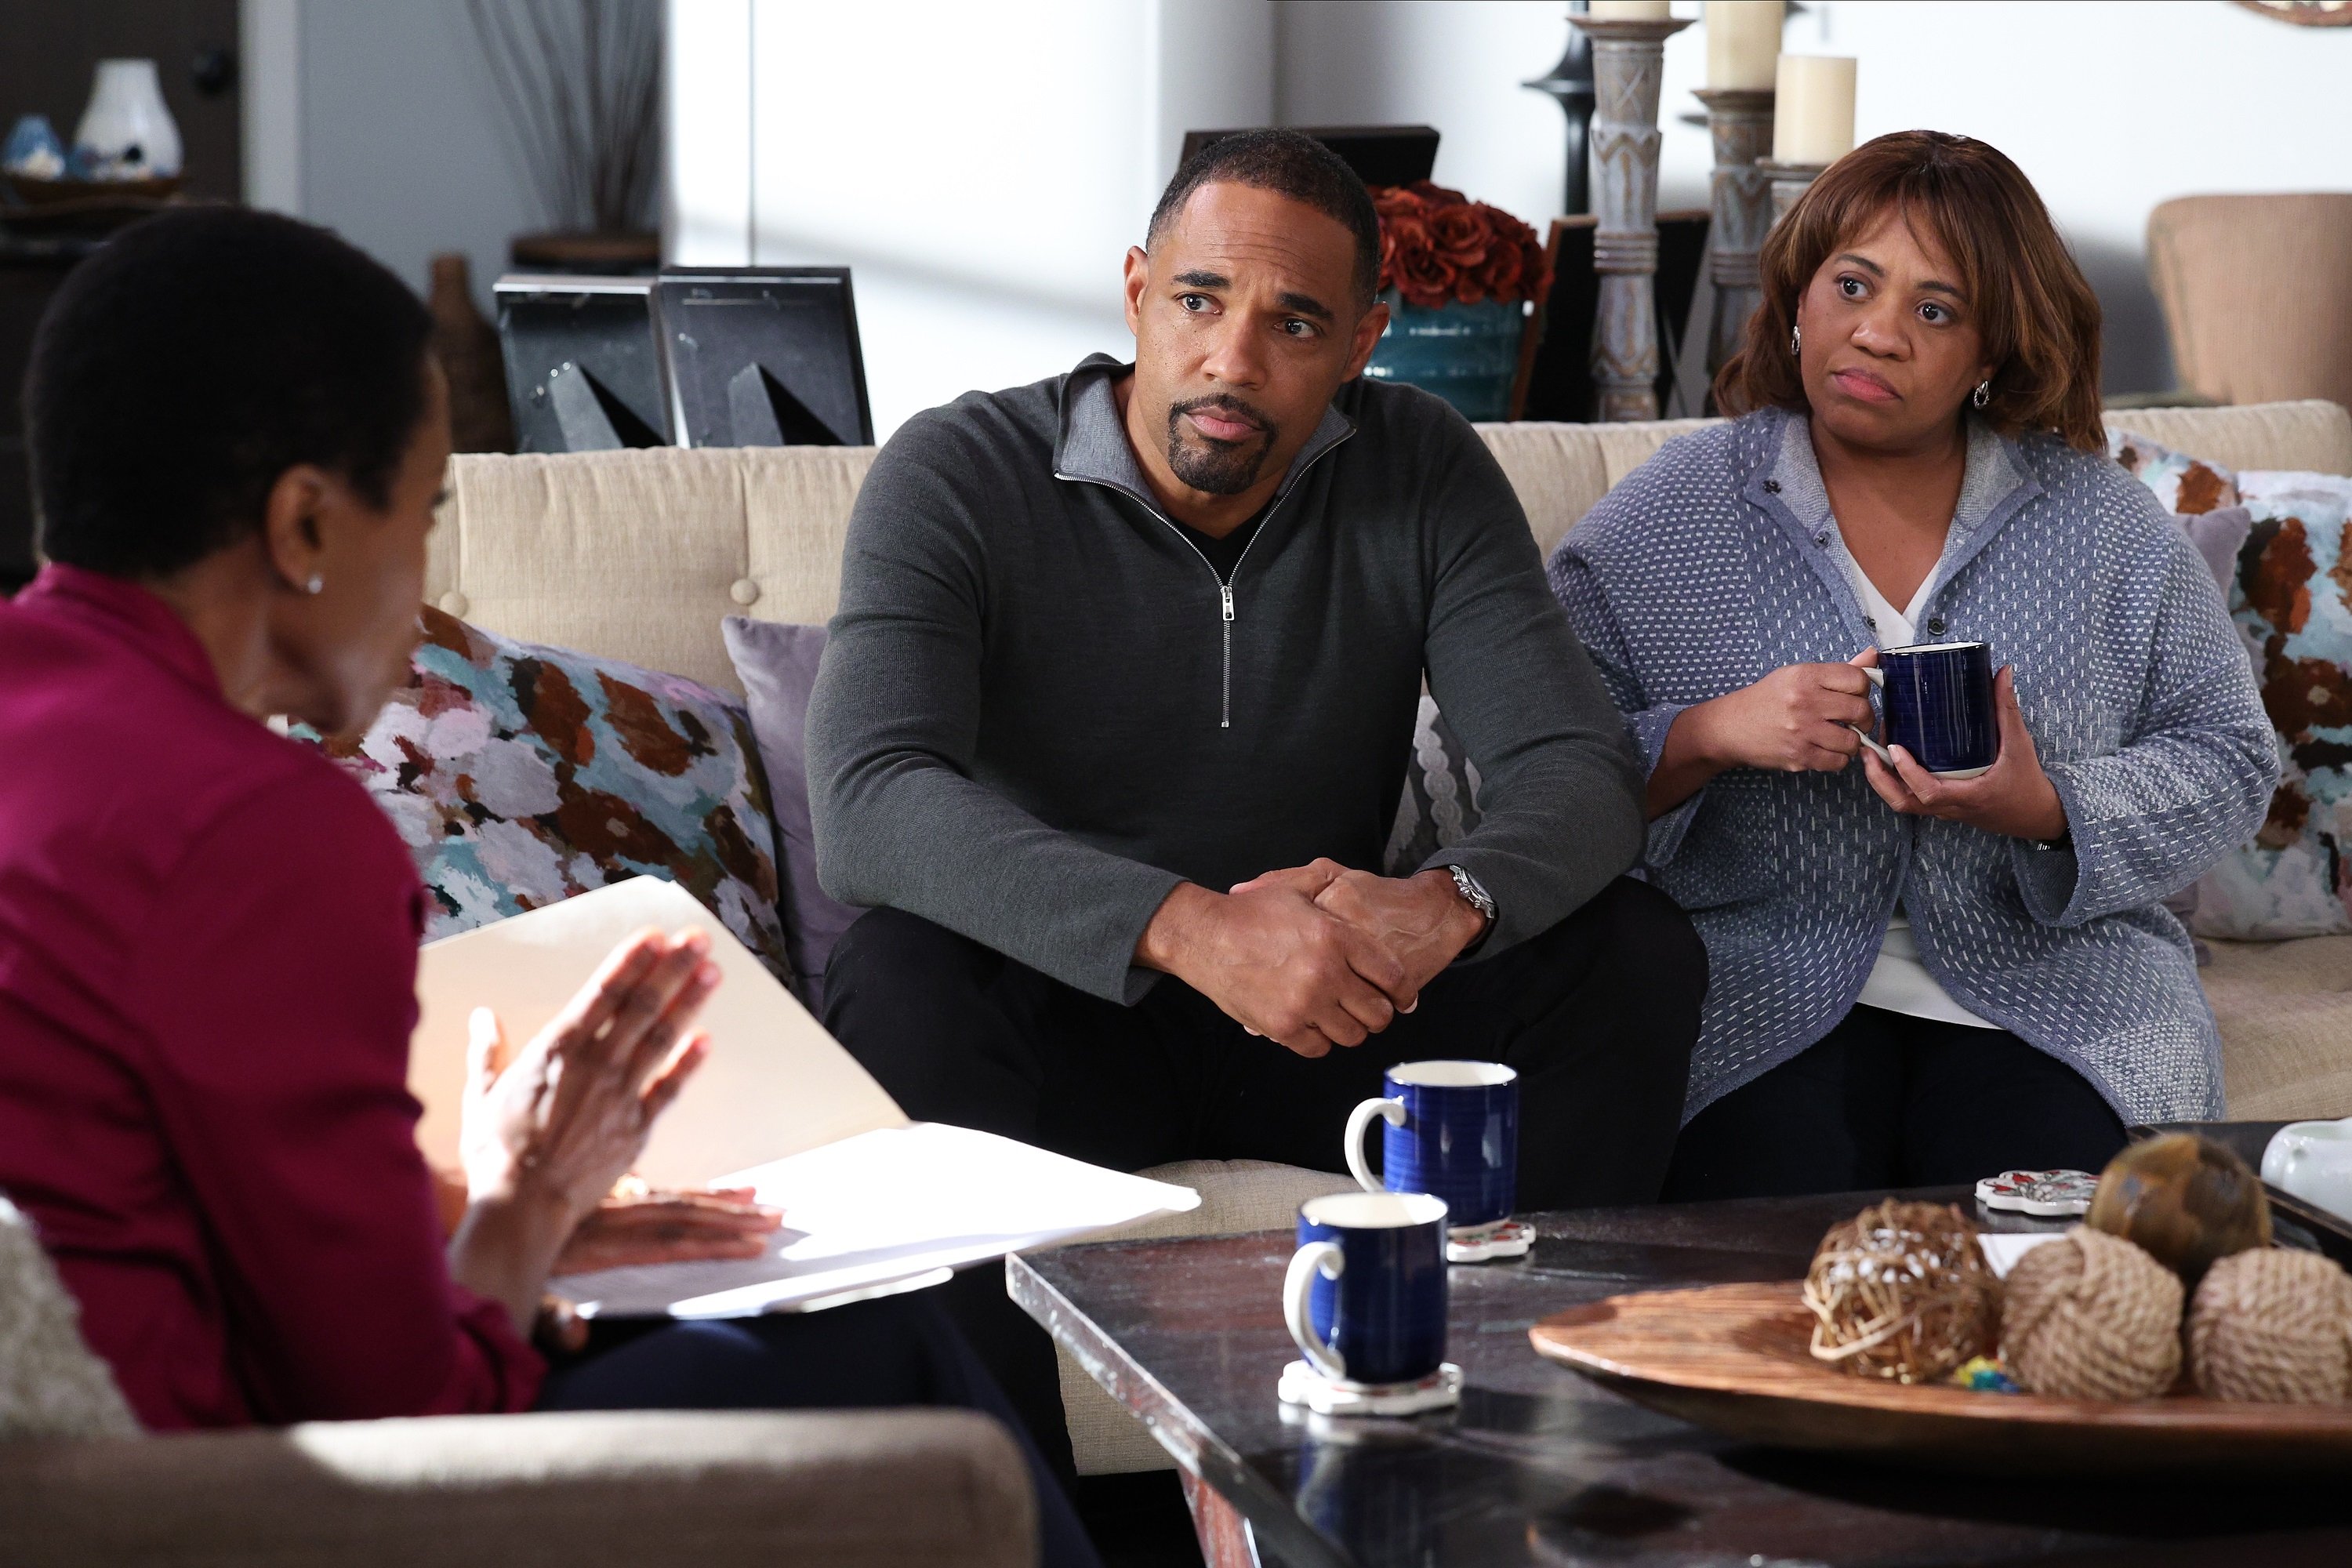 'Station 19' Episode 13 Jason George and Chandra Wilson portray Ben and Miranda sitting on a couch talking to Pru's grandparents